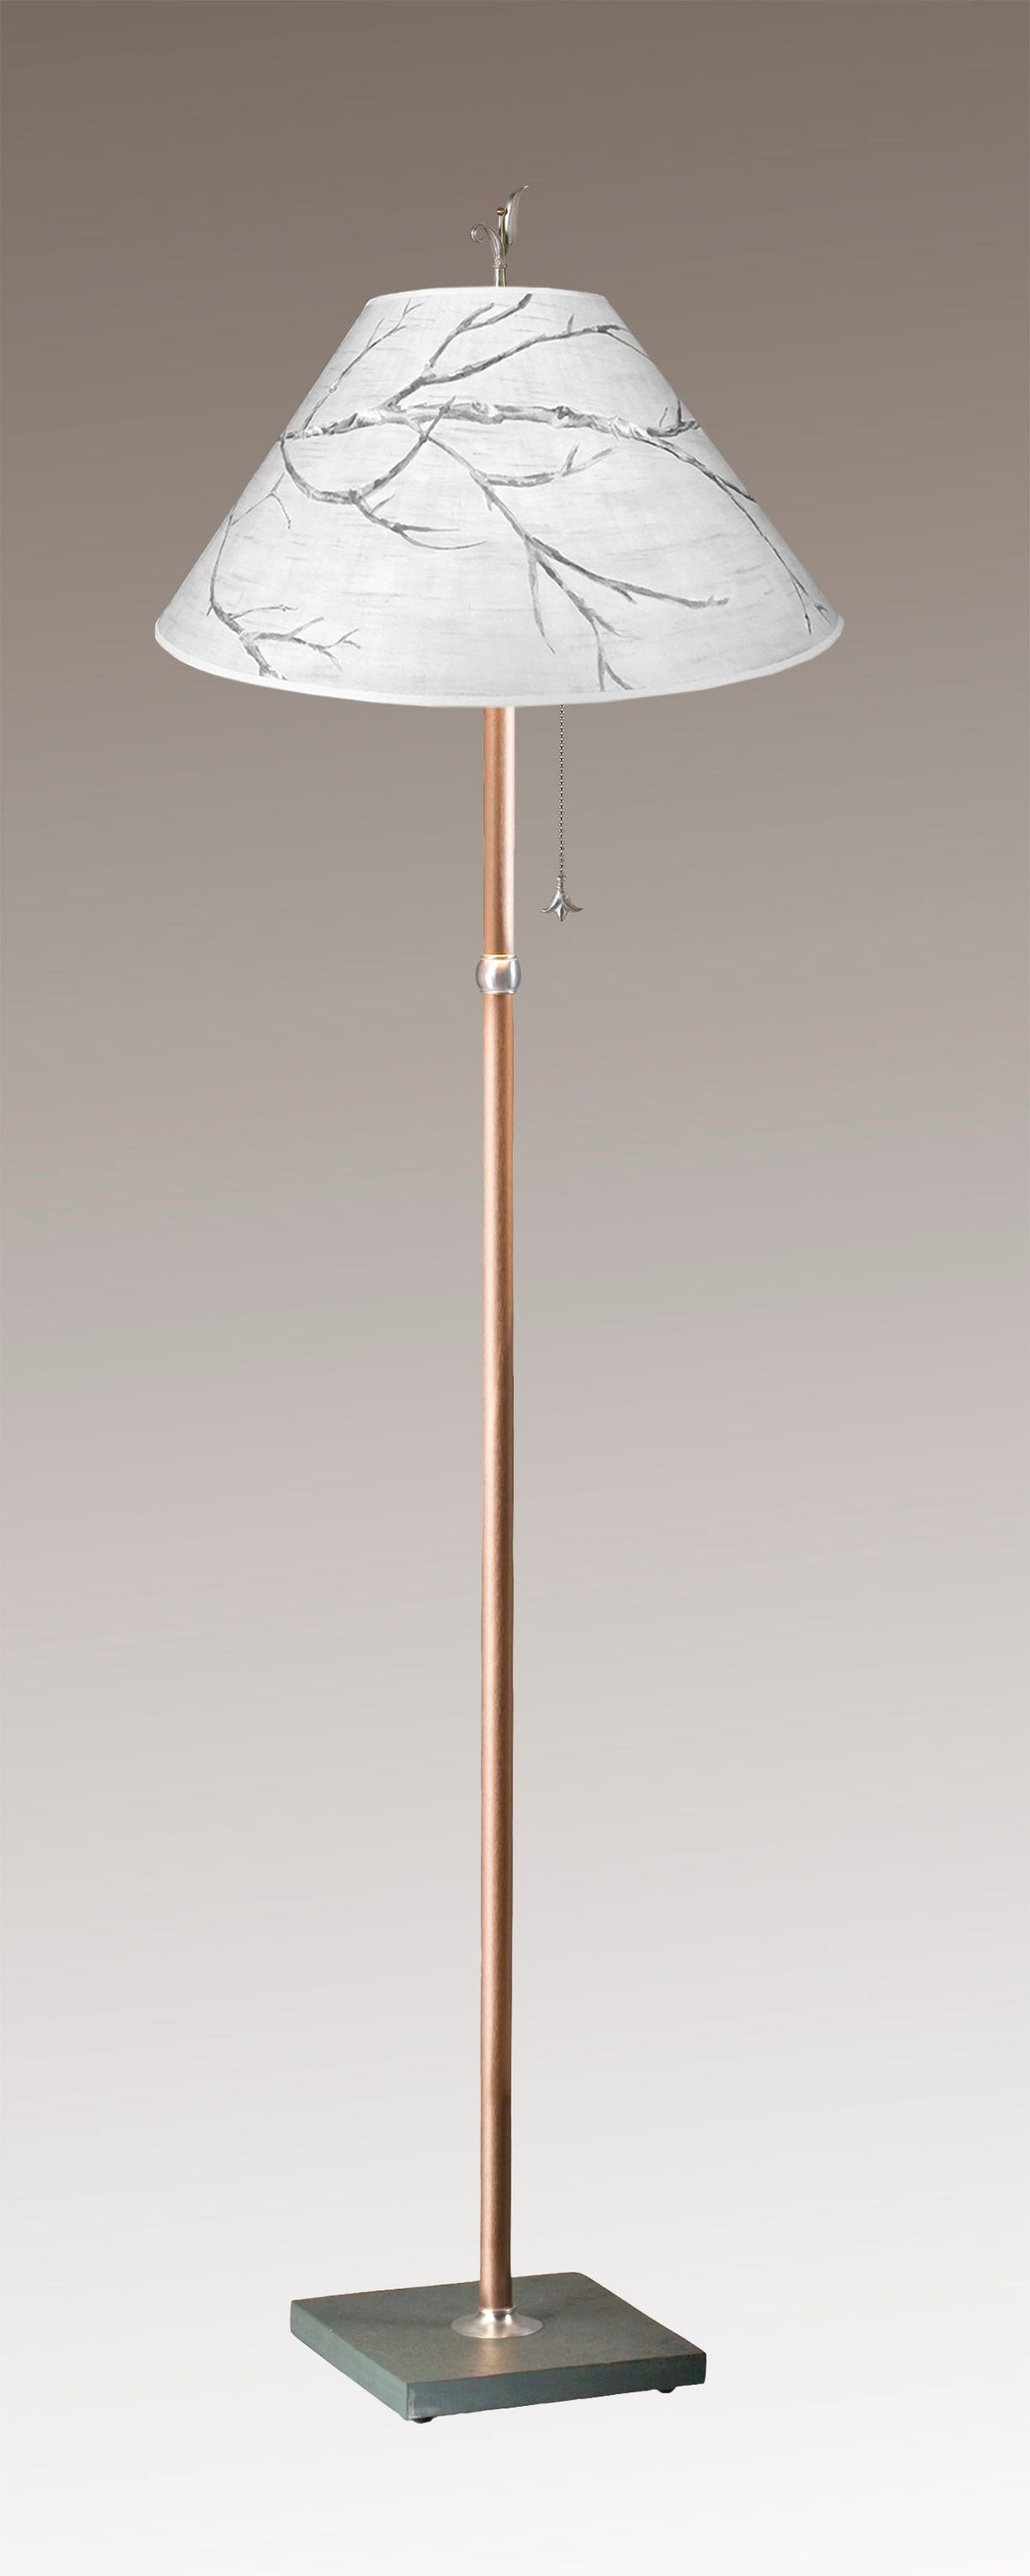 Copper Floor Lamp with Large Conical Shade in Sweeping Branch